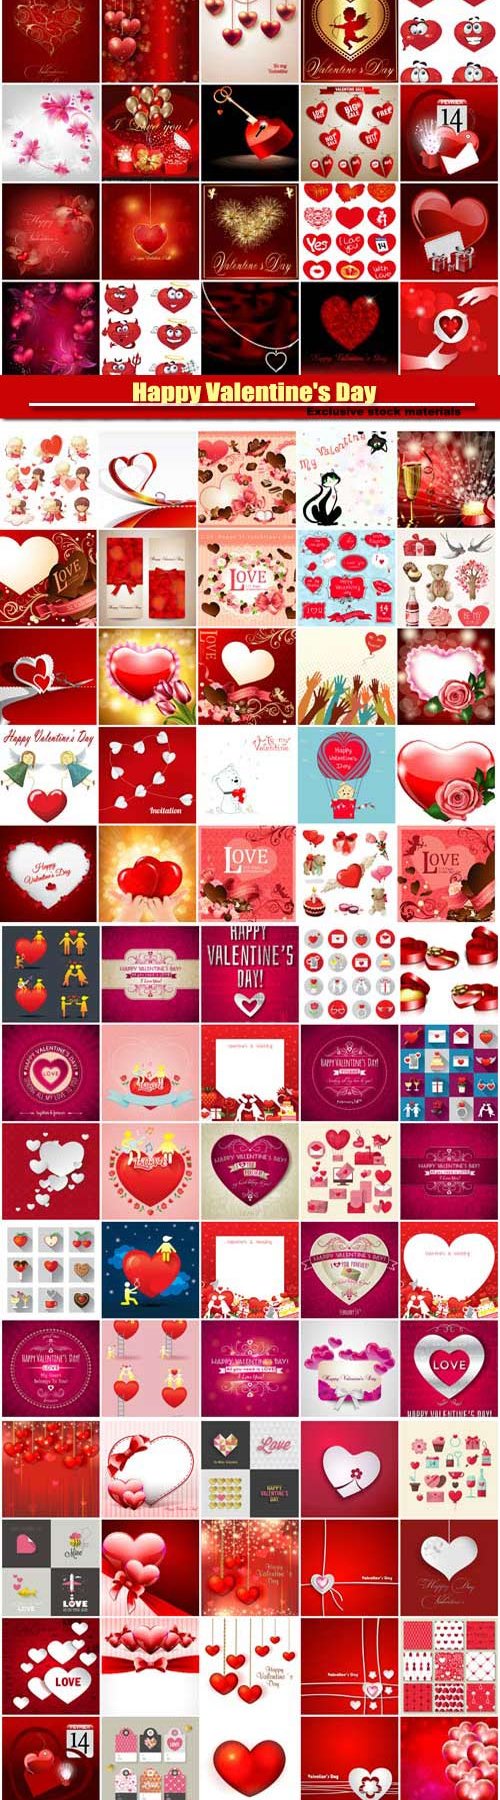 Big collection of vector festive Valentine's Day